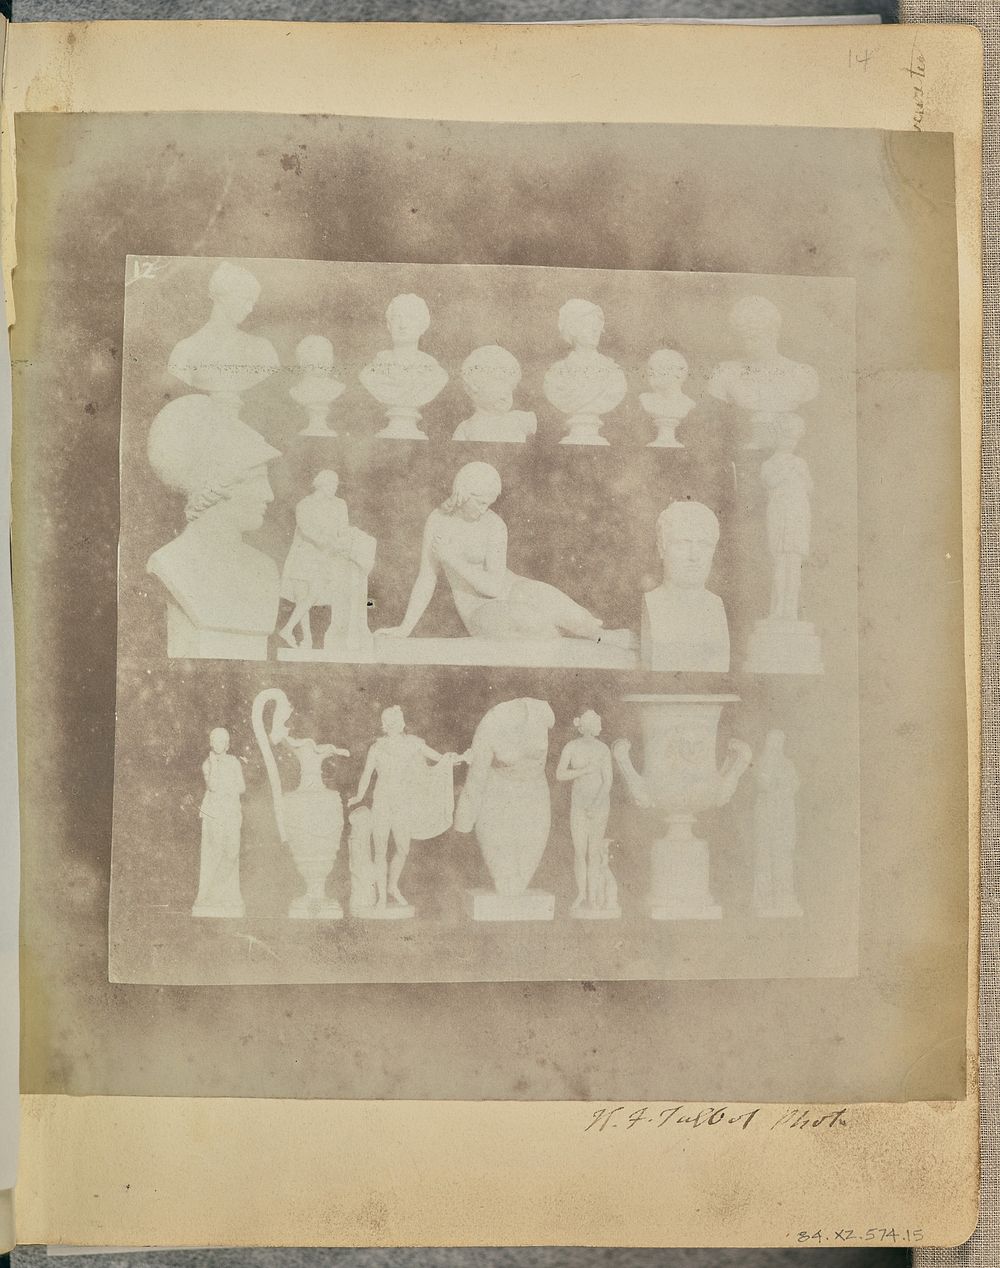 Casts on Three Shelves, in the Courtyard of Lacock Abbey] by William Henry Fox Talbot